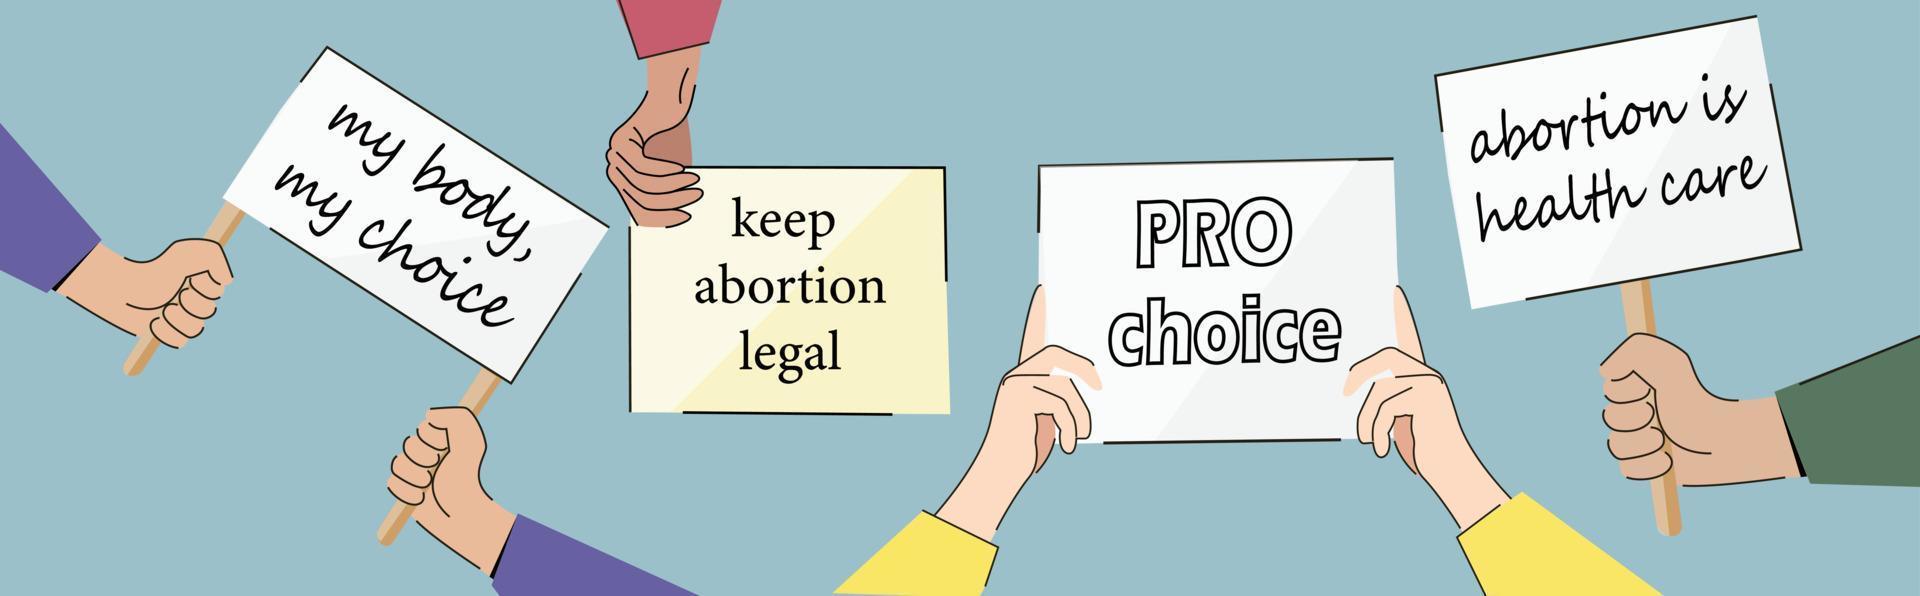 My body My choice. abortion is health care. PRO choice. Keep abortion legal. Human hands demonstration with blank signs. Feminist protest. Human rights. Flat vector stock illustration